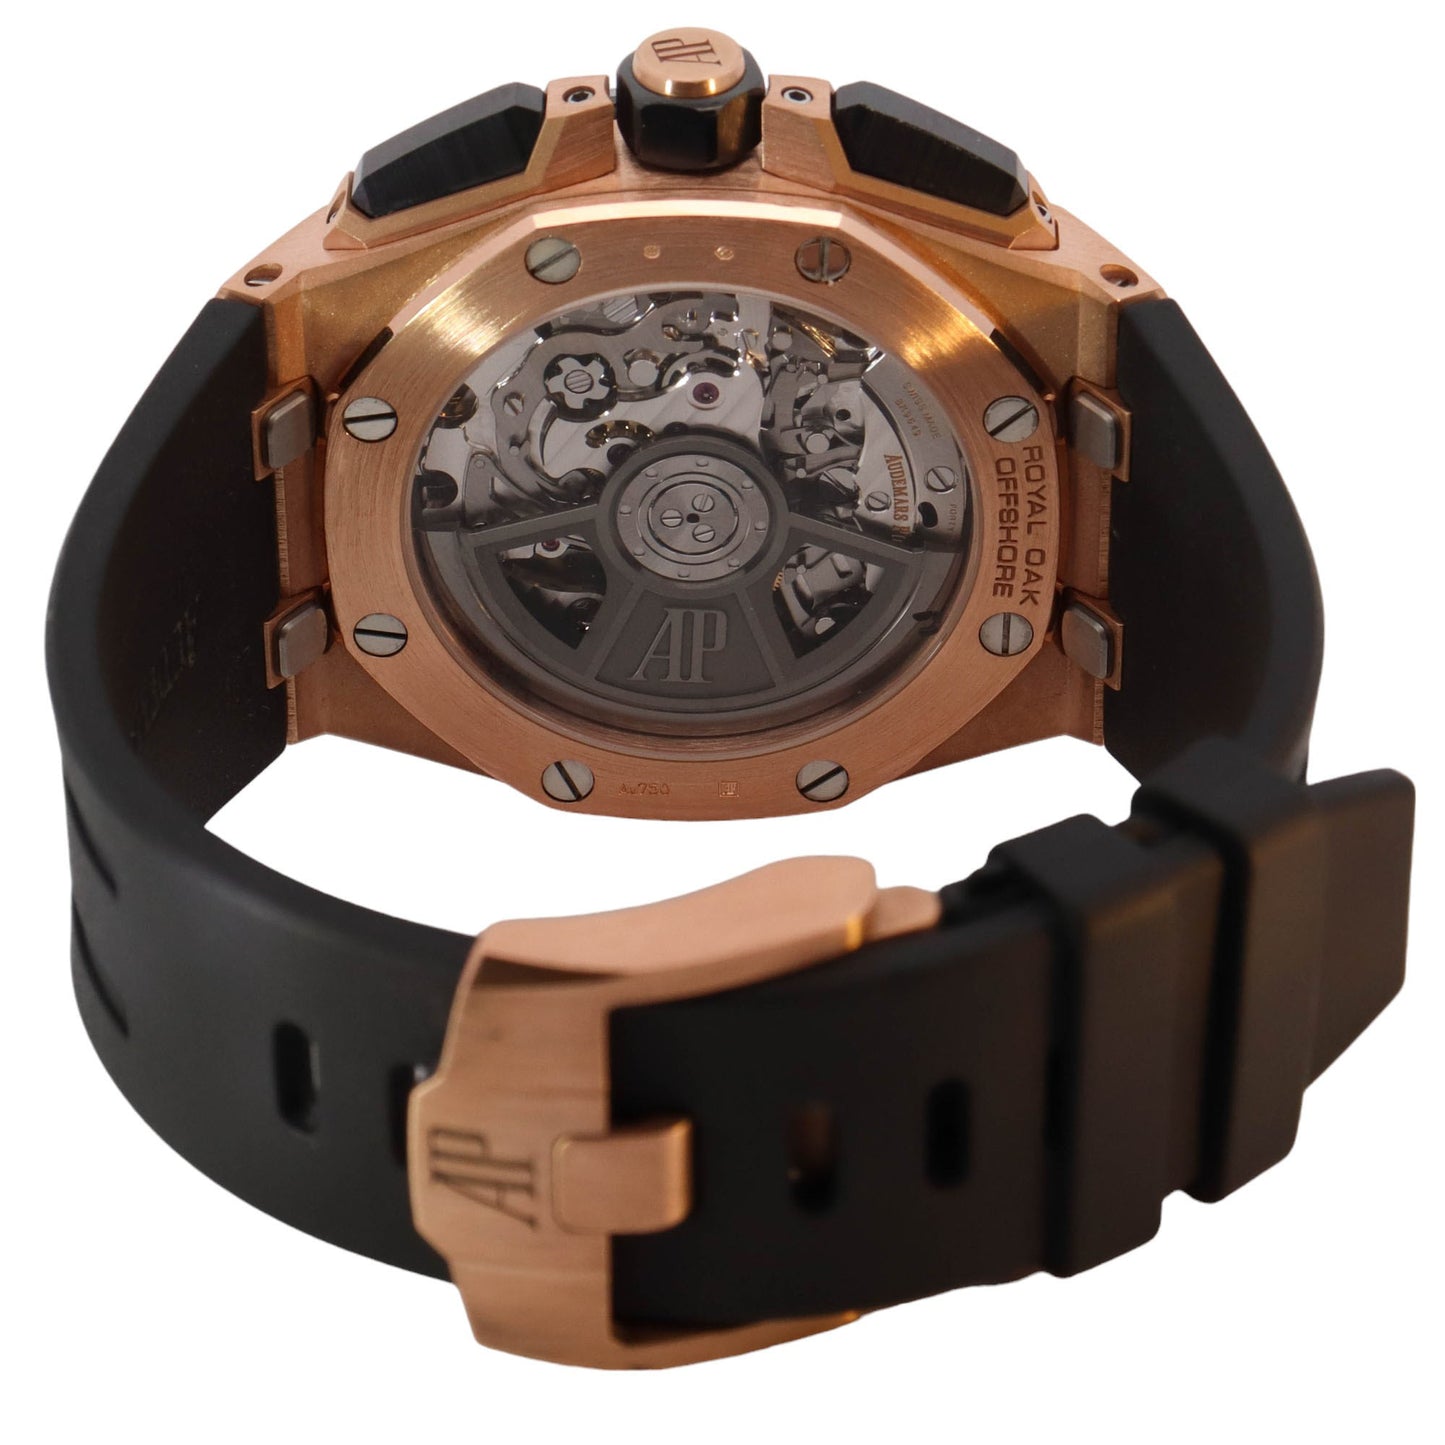 Audemars Piguet Royal Oak Offshore Rose Gold 43mm Black Chronograph Dial Watch Reference# 26420RO.OO.A002CA.01